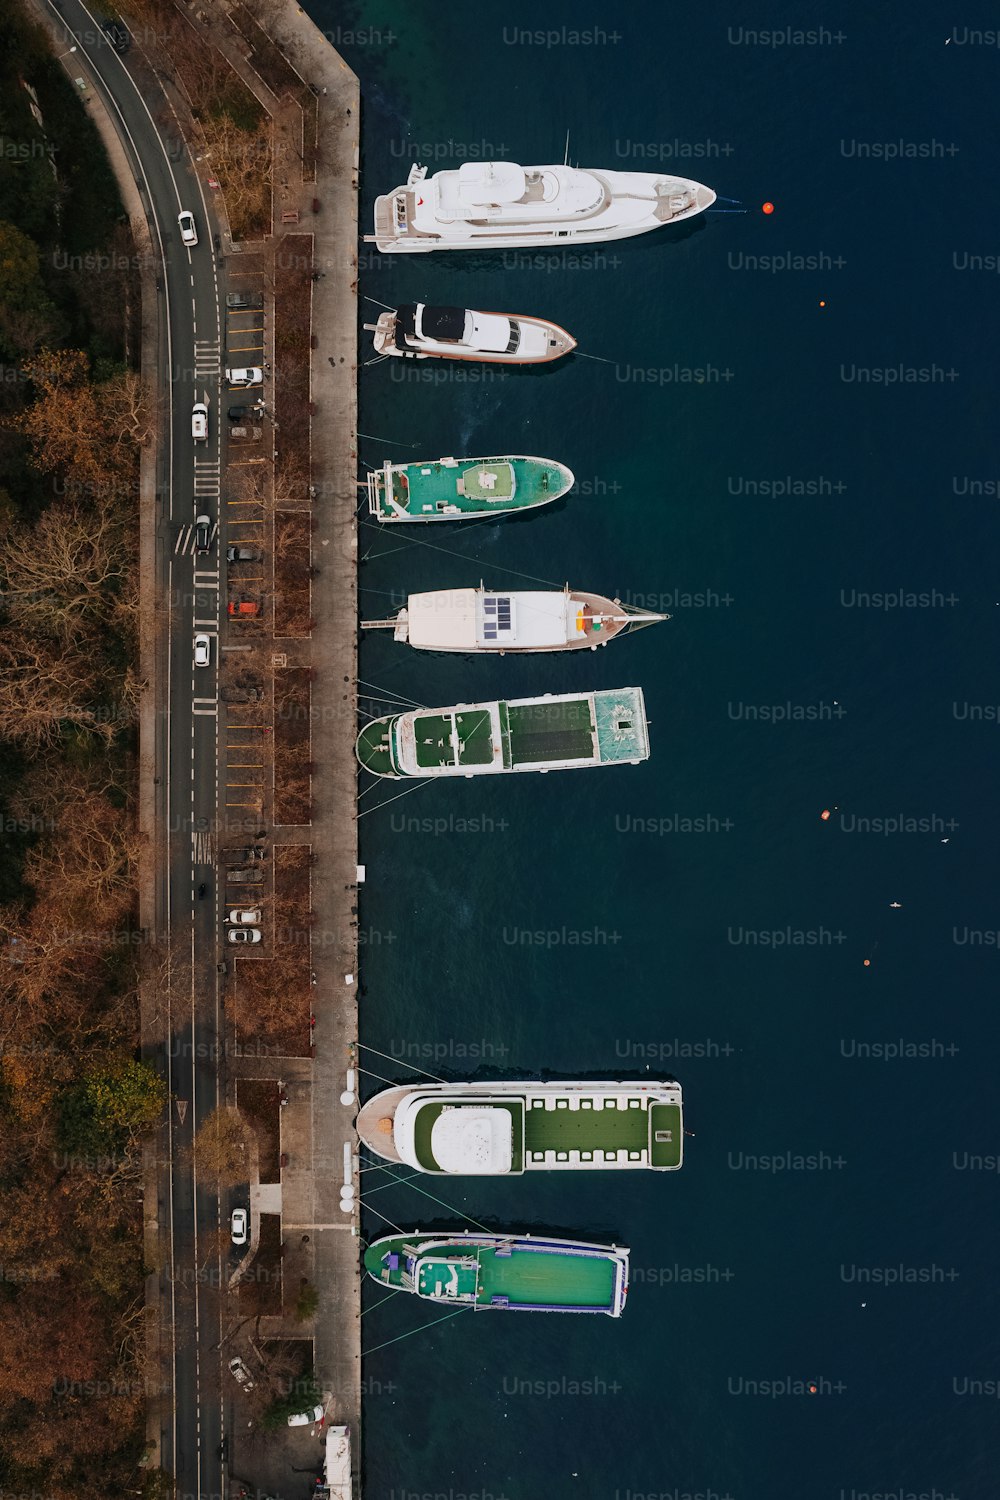 a group of boats parked next to each other on a body of water